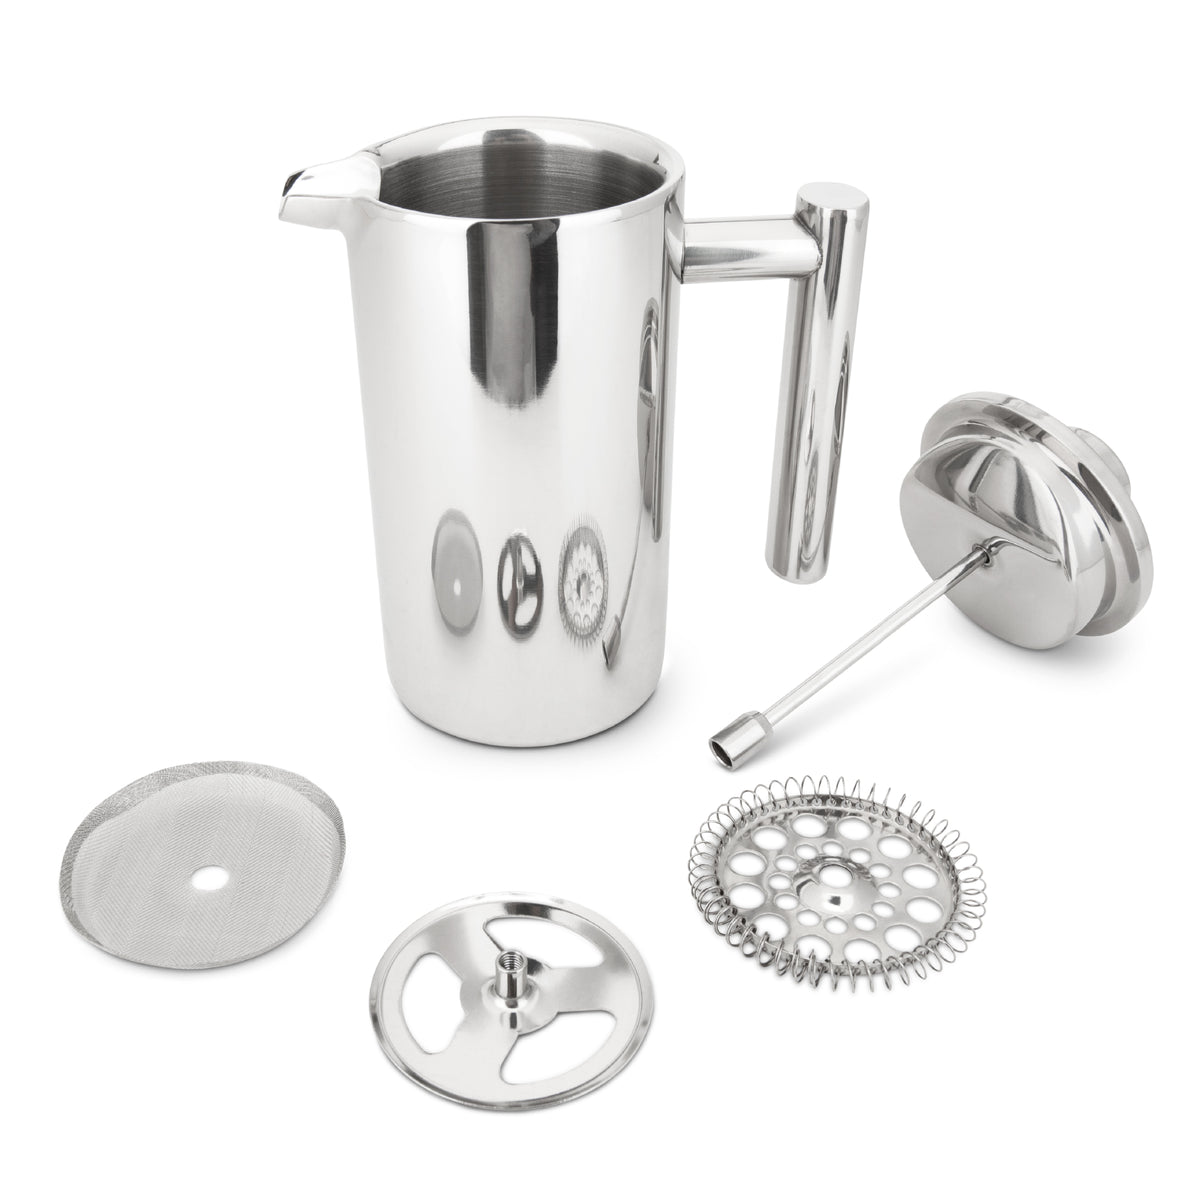 All the parts includes in the EspressoWorks French Press Coffee Maker